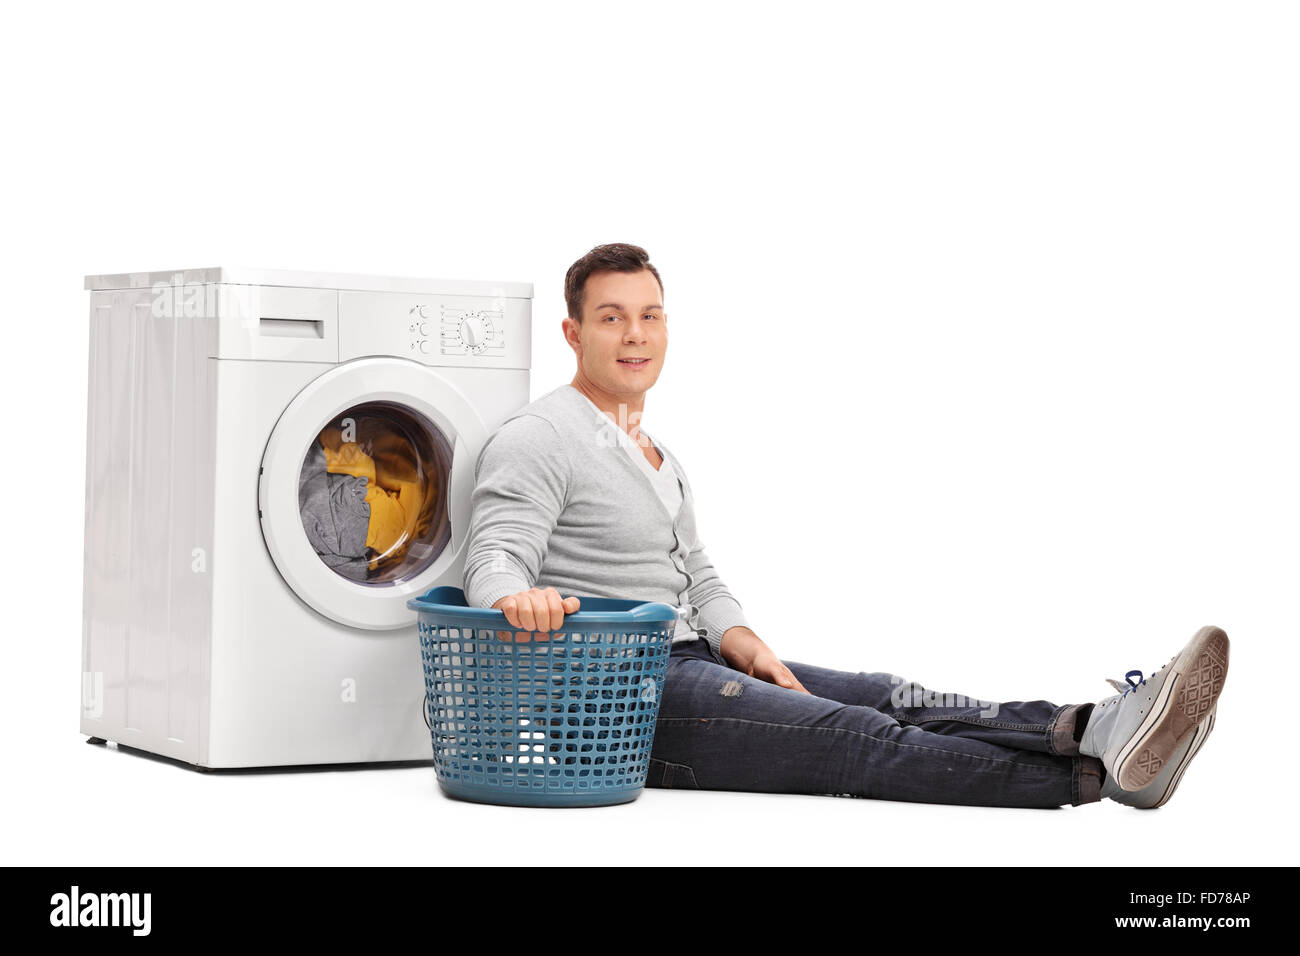 Studio shot of a young man sitting by a washing machine and doing laundry isolated on white background Stock Photo